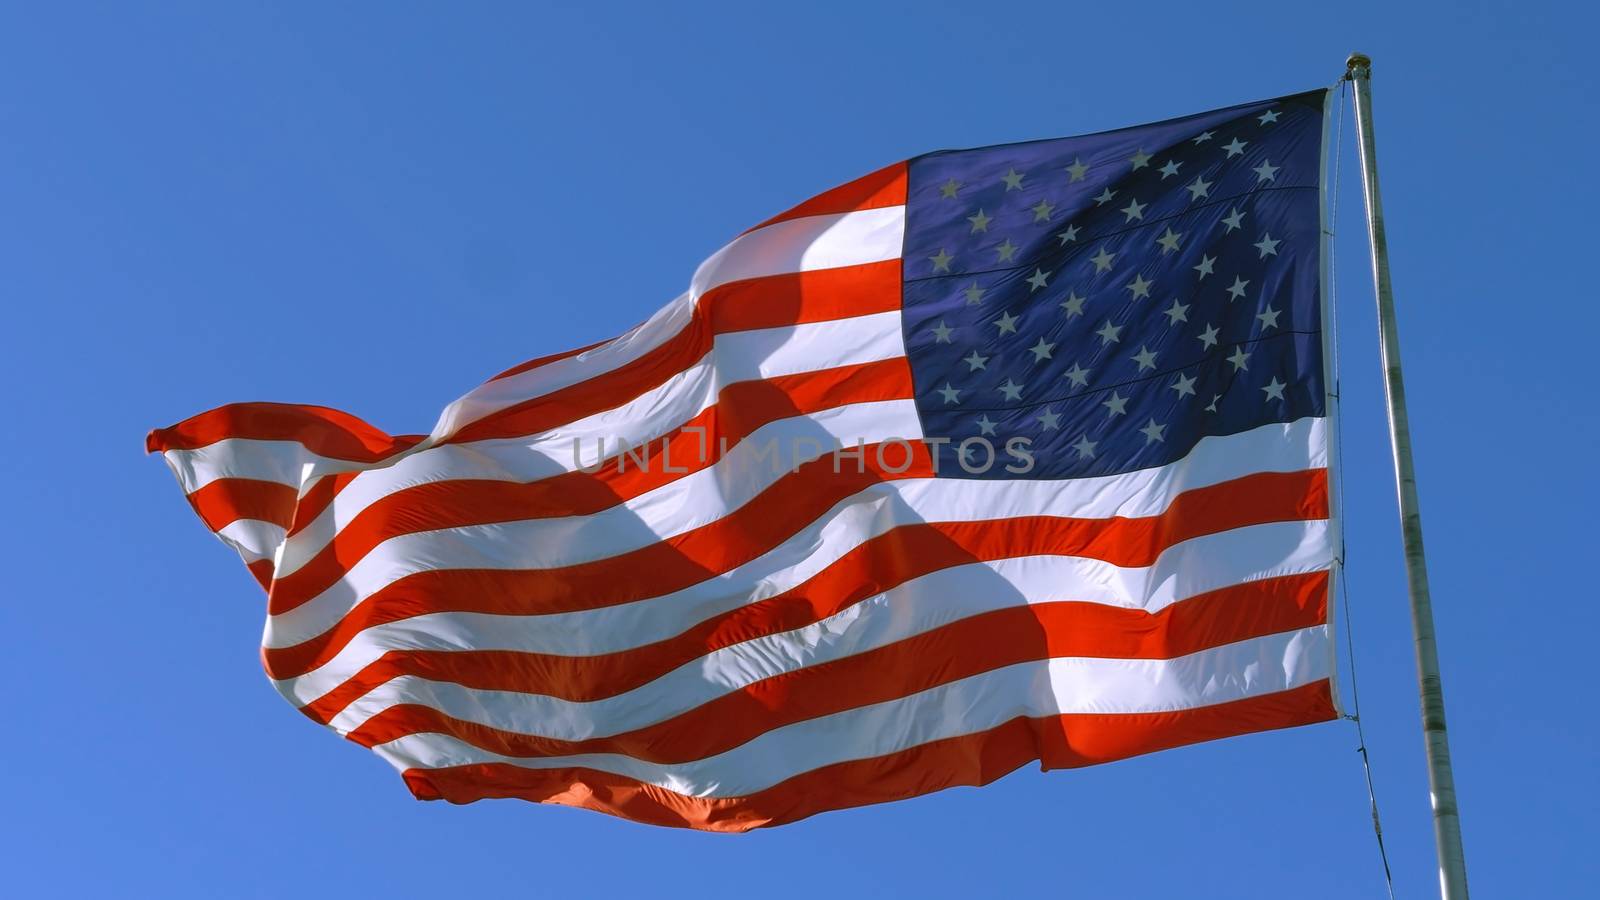 USA flag on flagpole. American flag - symbol of freedom and law in the USA. American flag flies in the sky as a symbol of the Great Country of the USA. Big American flag against blue sky.